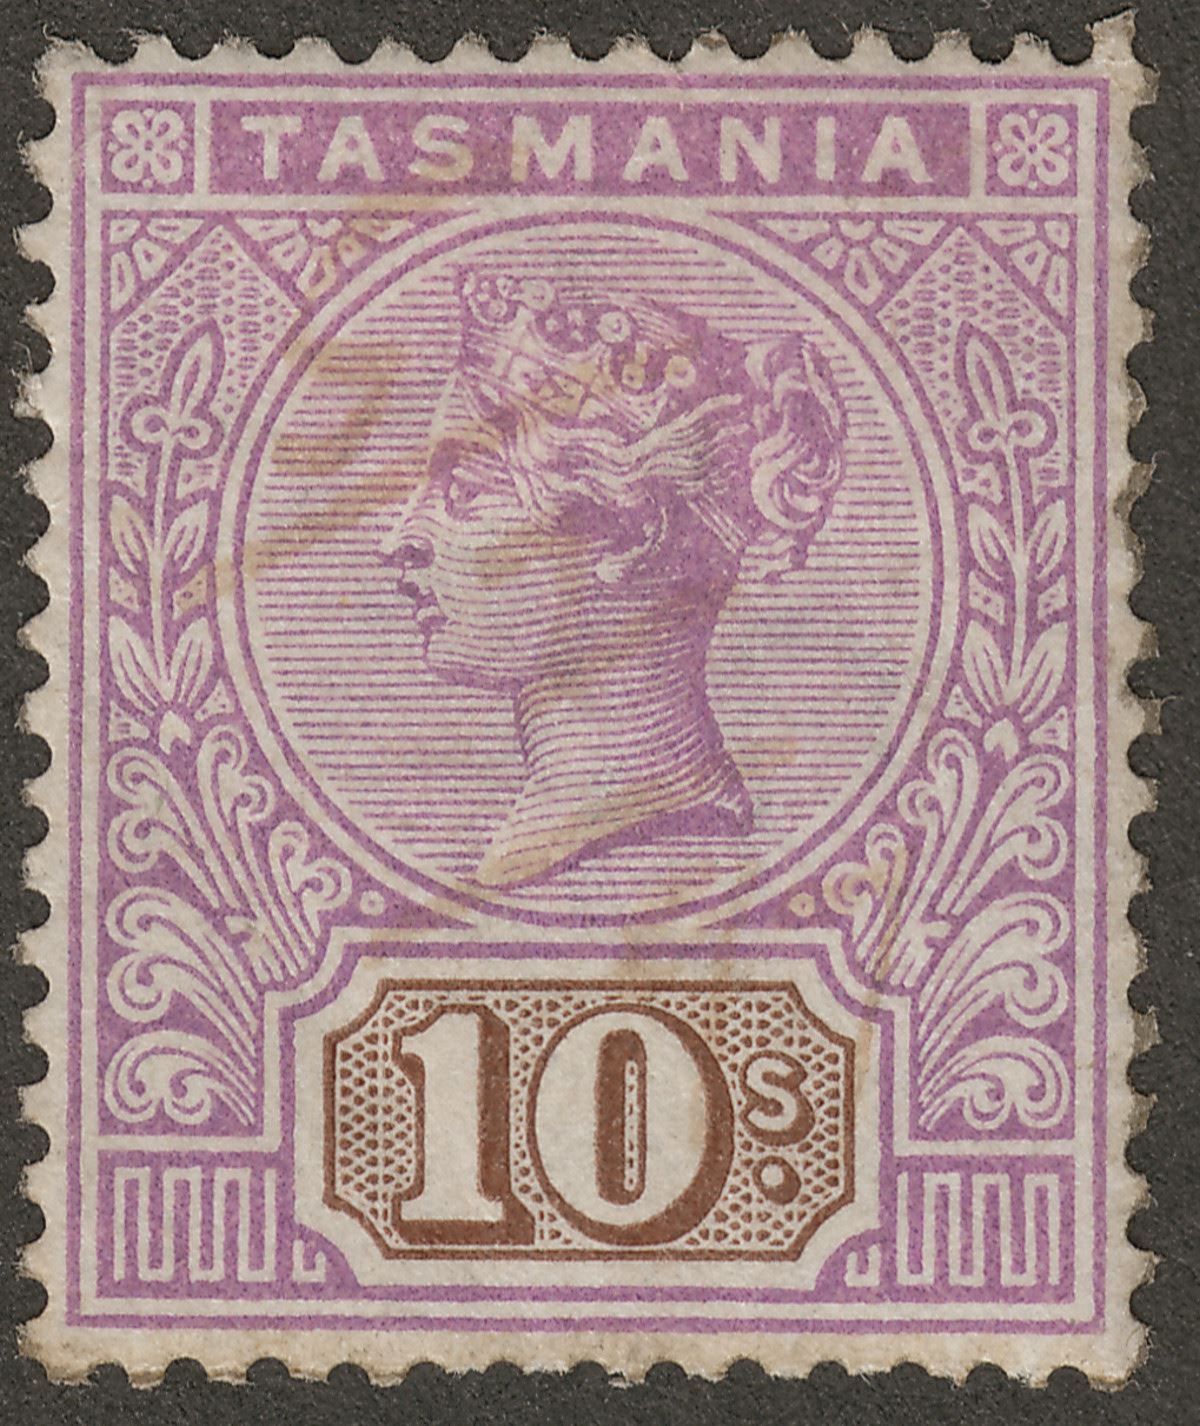 Tasmania 1892 Queen Victoria 10sh Mauve and Brown Cleaned Fiscal SG224 spacefill